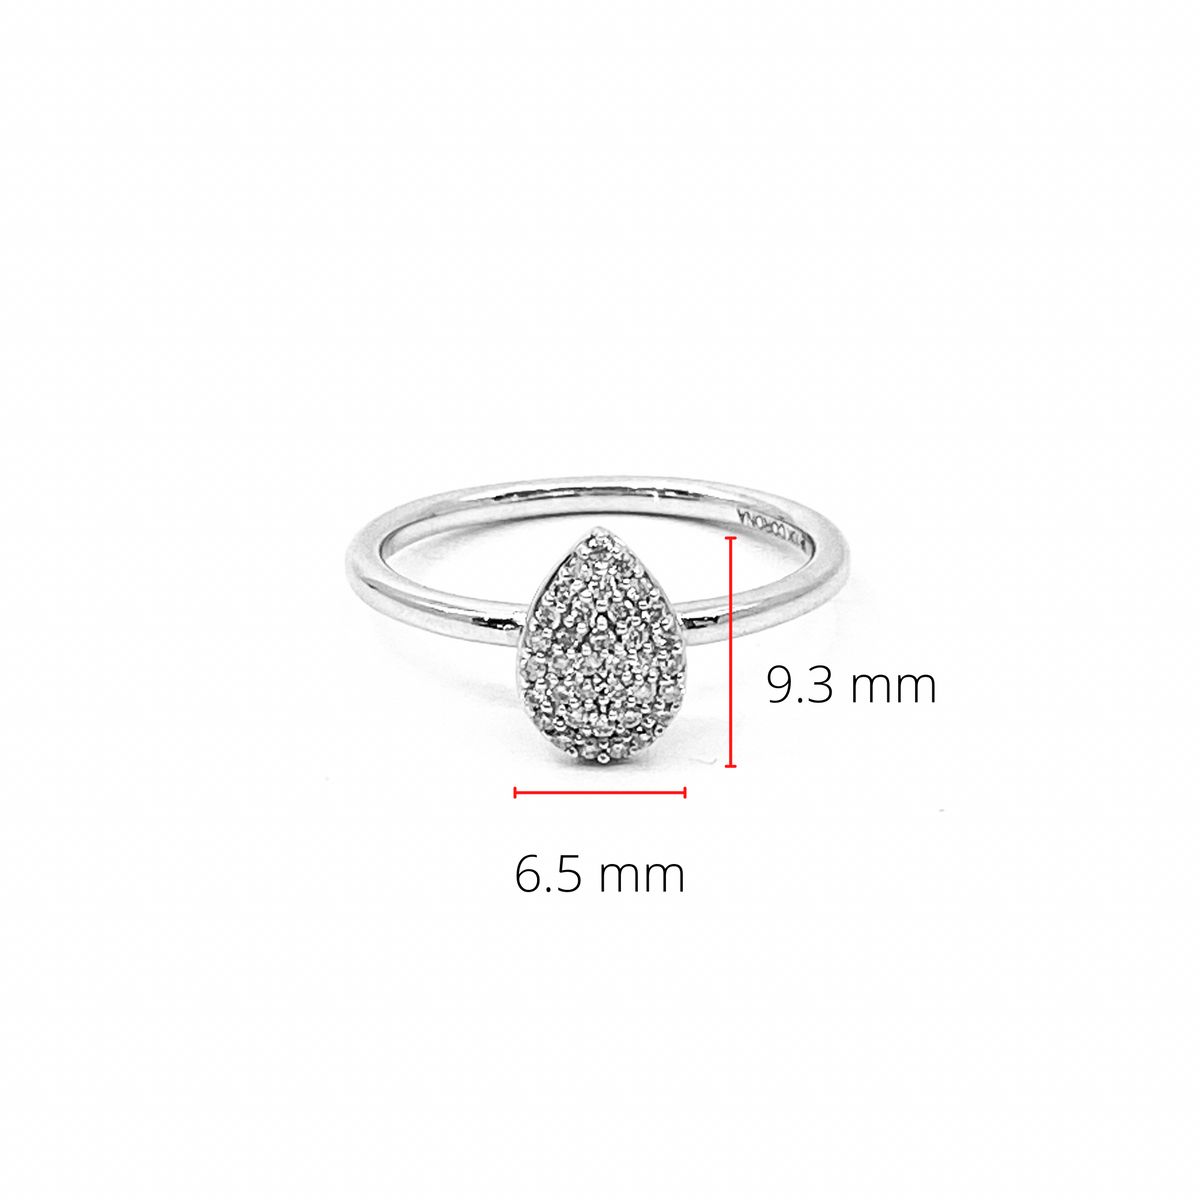 10K White Gold 0.15cttw Pave Pear Shape Diamond Engagement Ring, size 6.5